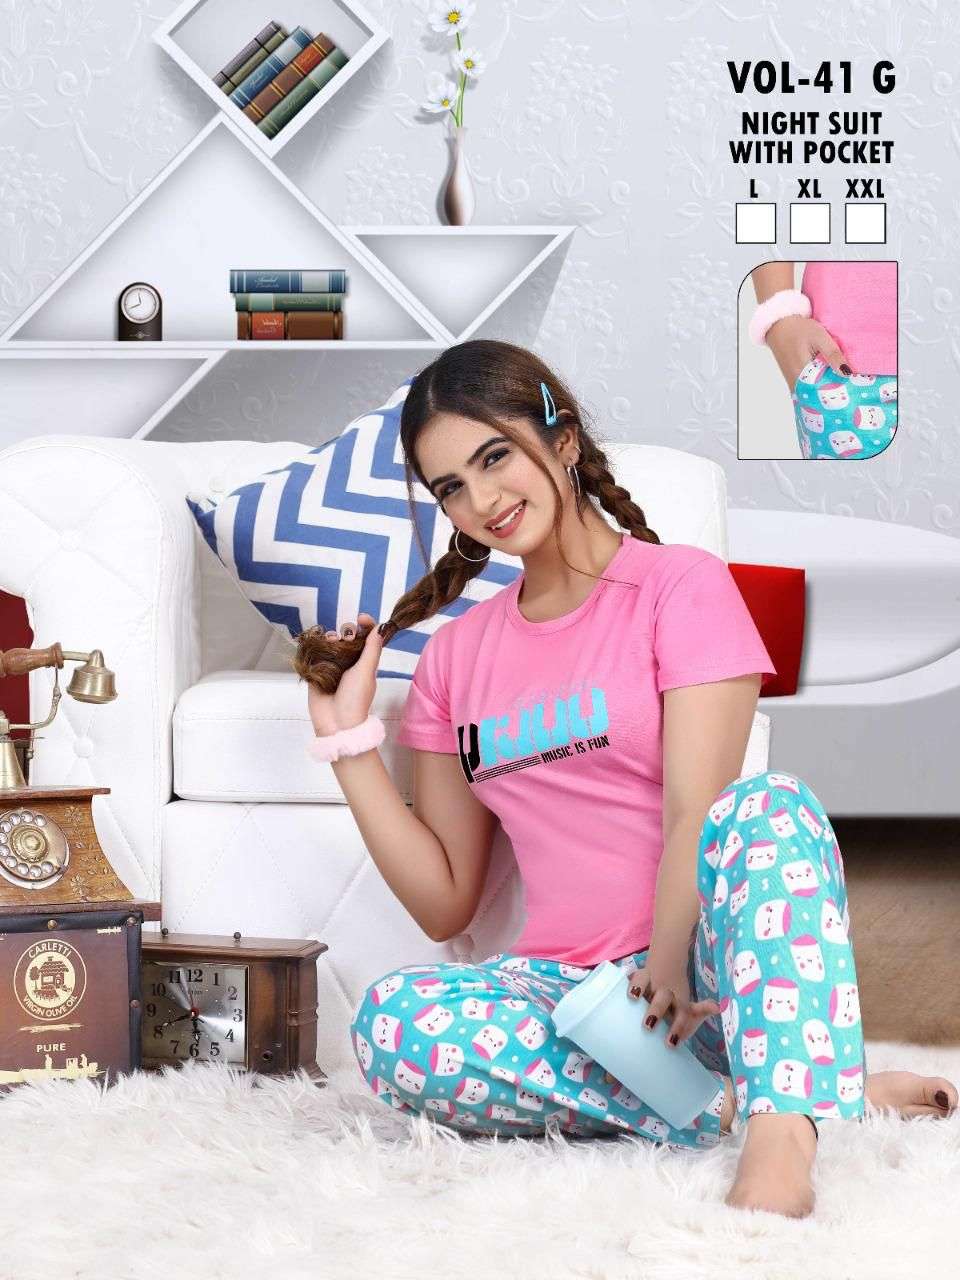 VOL 141 G BY FASHION TALK BRAND HEAVY SHINKER HOSIERY COTTON NIGHT SUITS WITH POCKET WHOLESALER AND ...